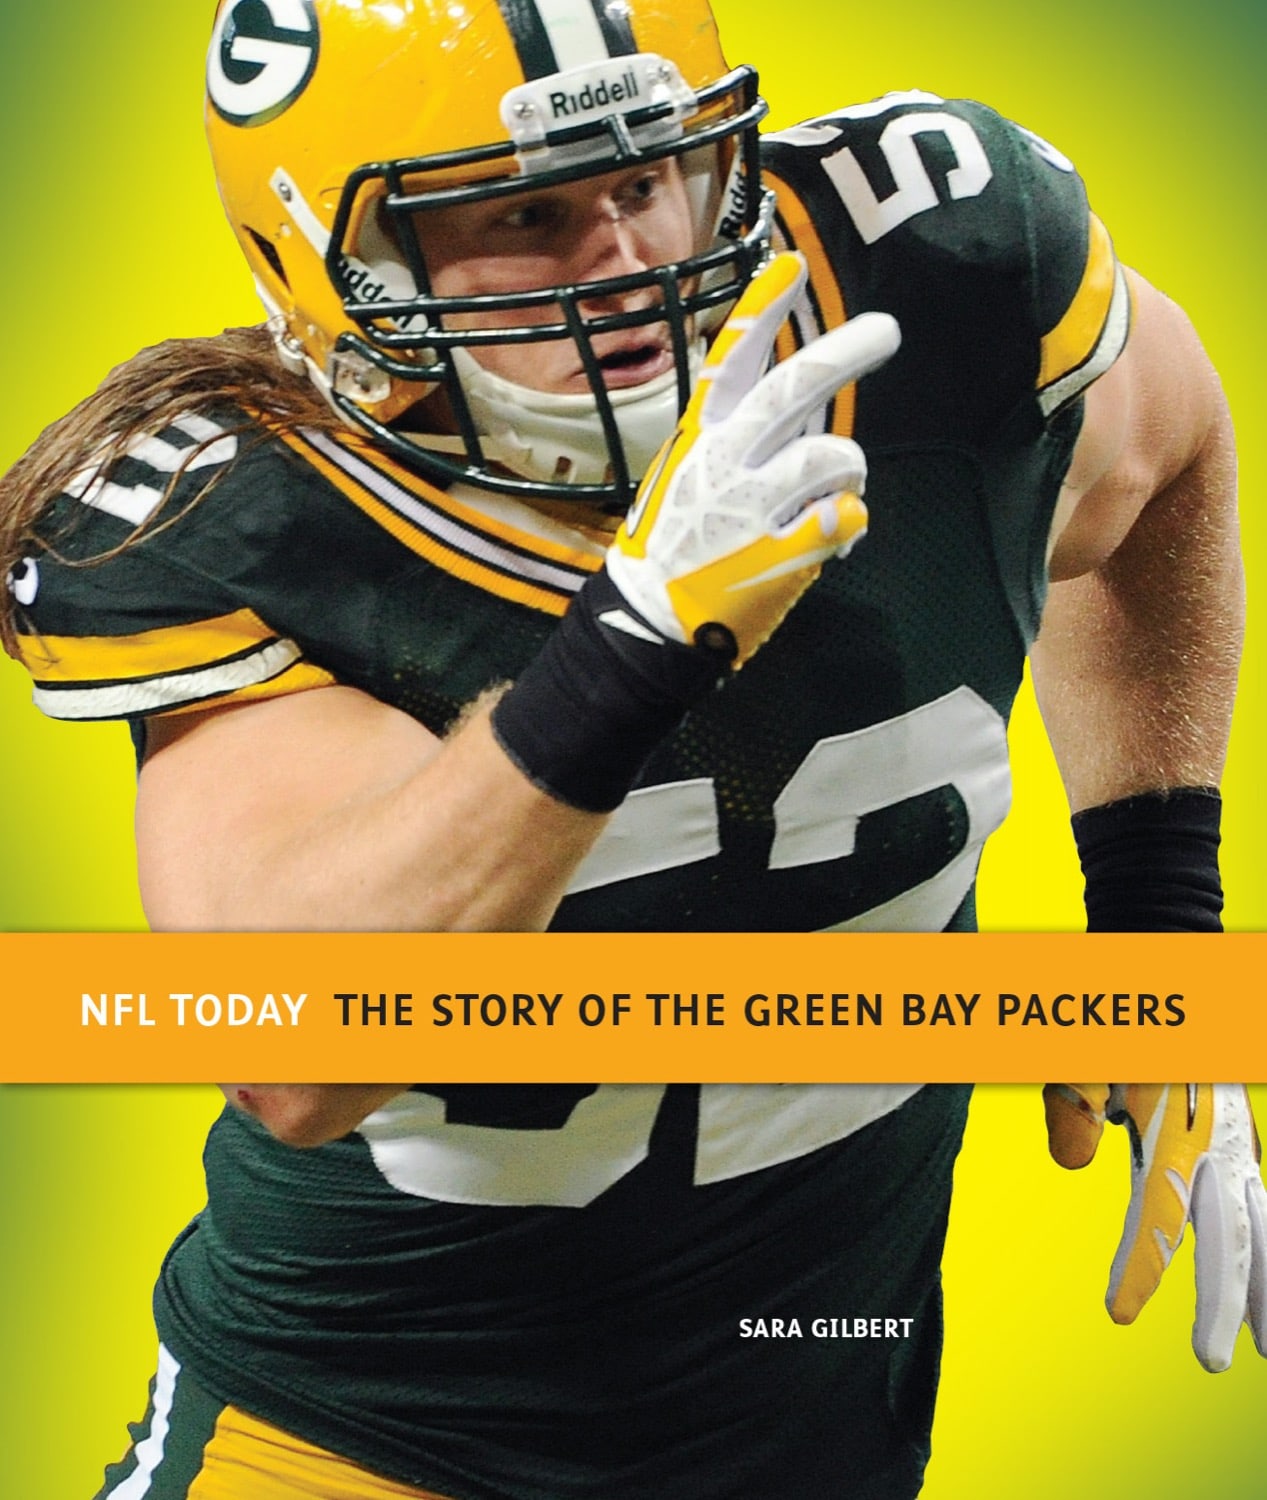 NFL Today: The Story of the Green Bay Packers